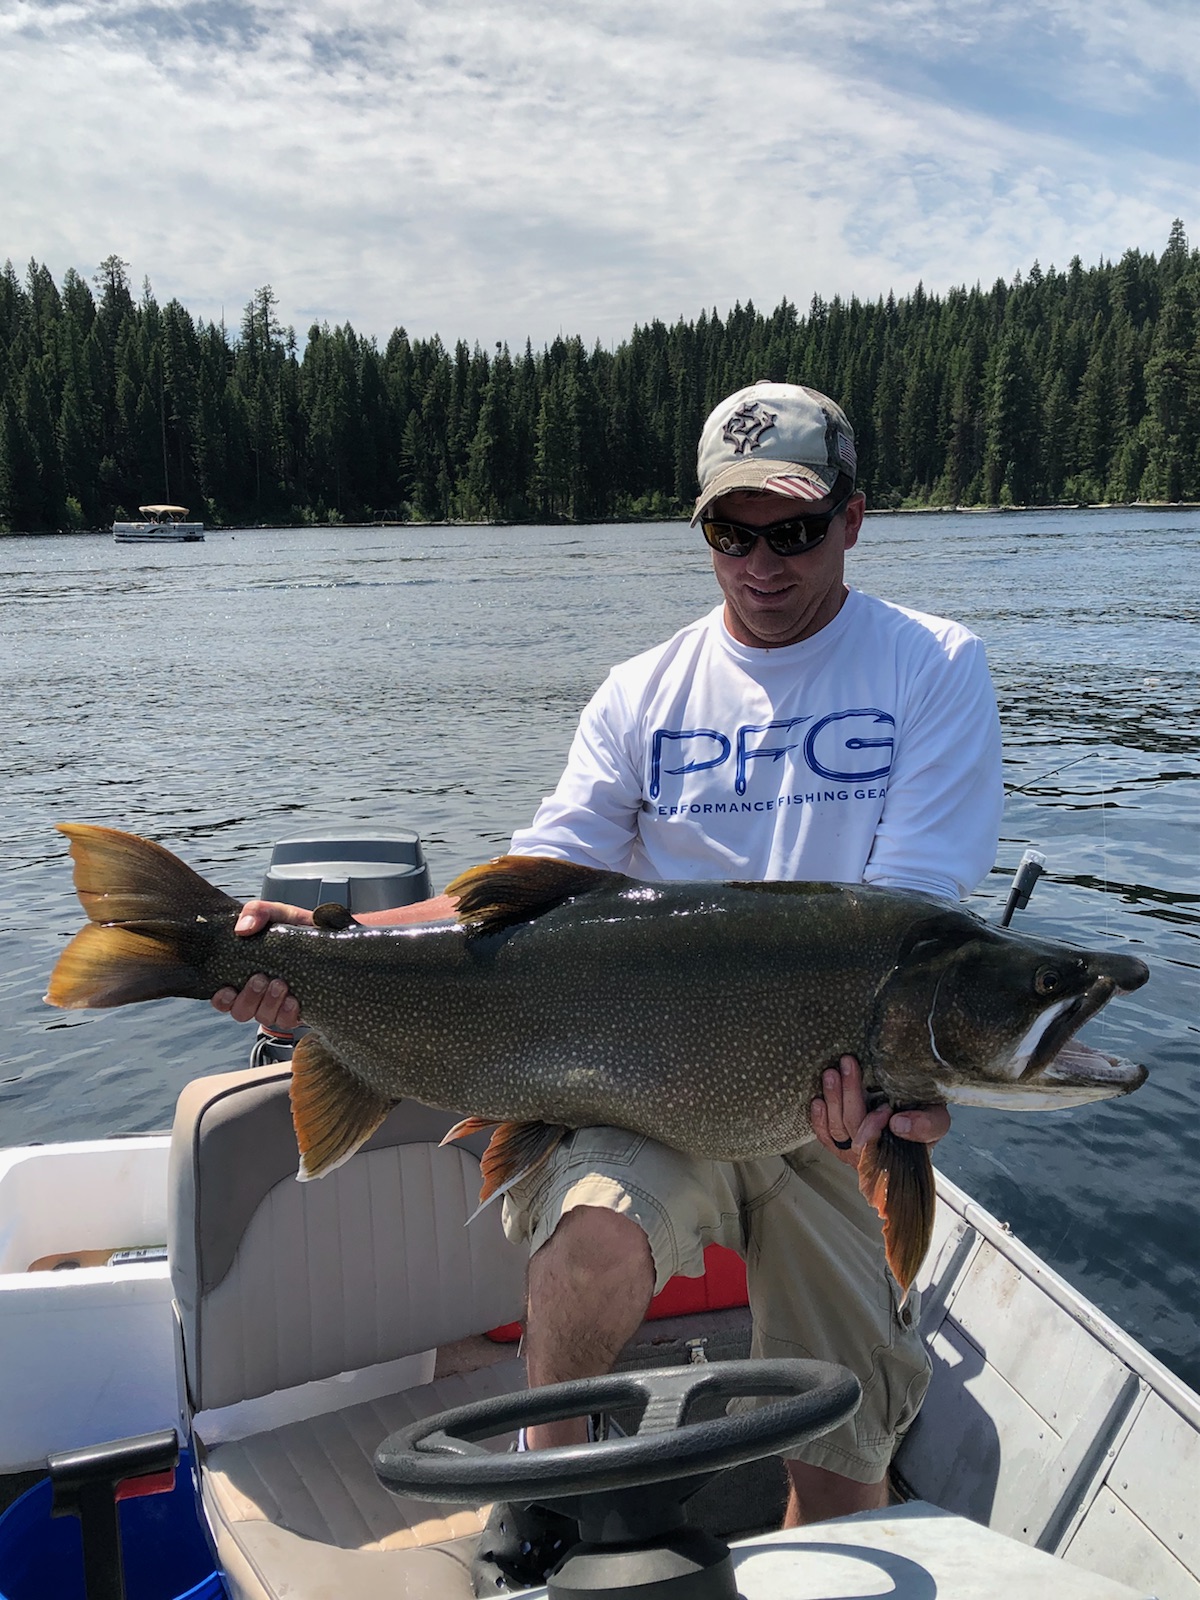 After promising early results from lake trout suppression, kokanee